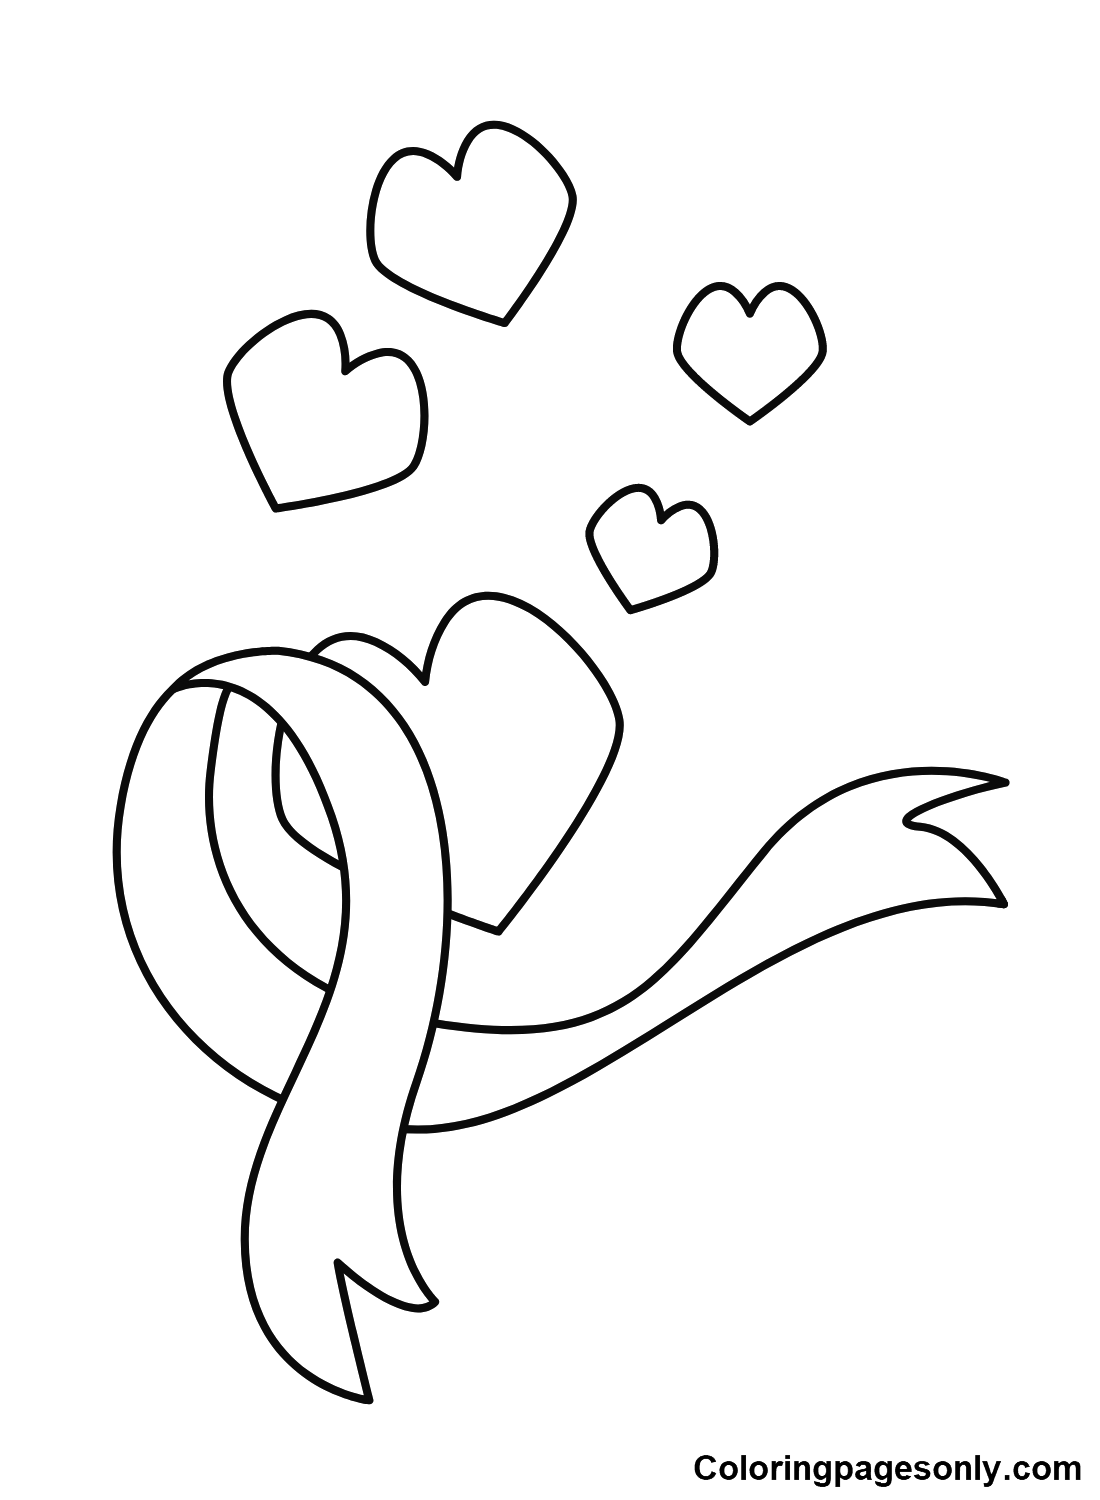 Autism Awareness Day Coloring Pages